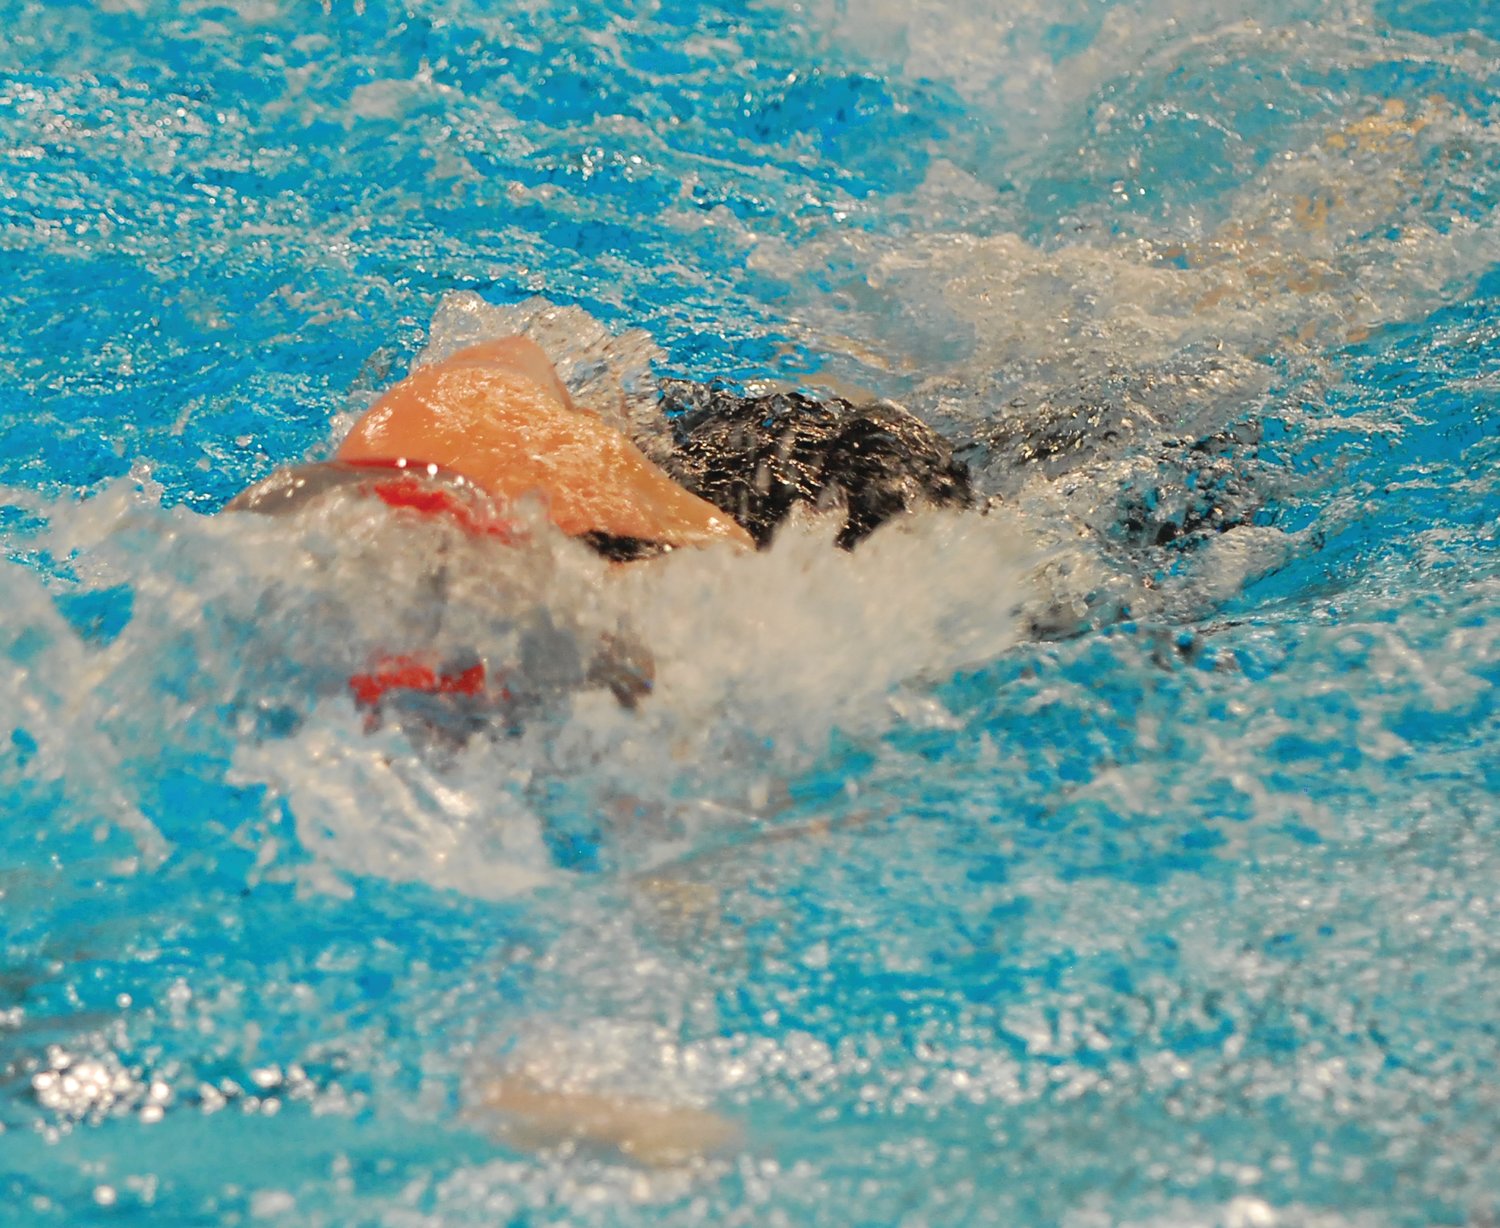 Southmont's Megan Scheidler won the 500 freestyle and was second in the 200 freestyle.